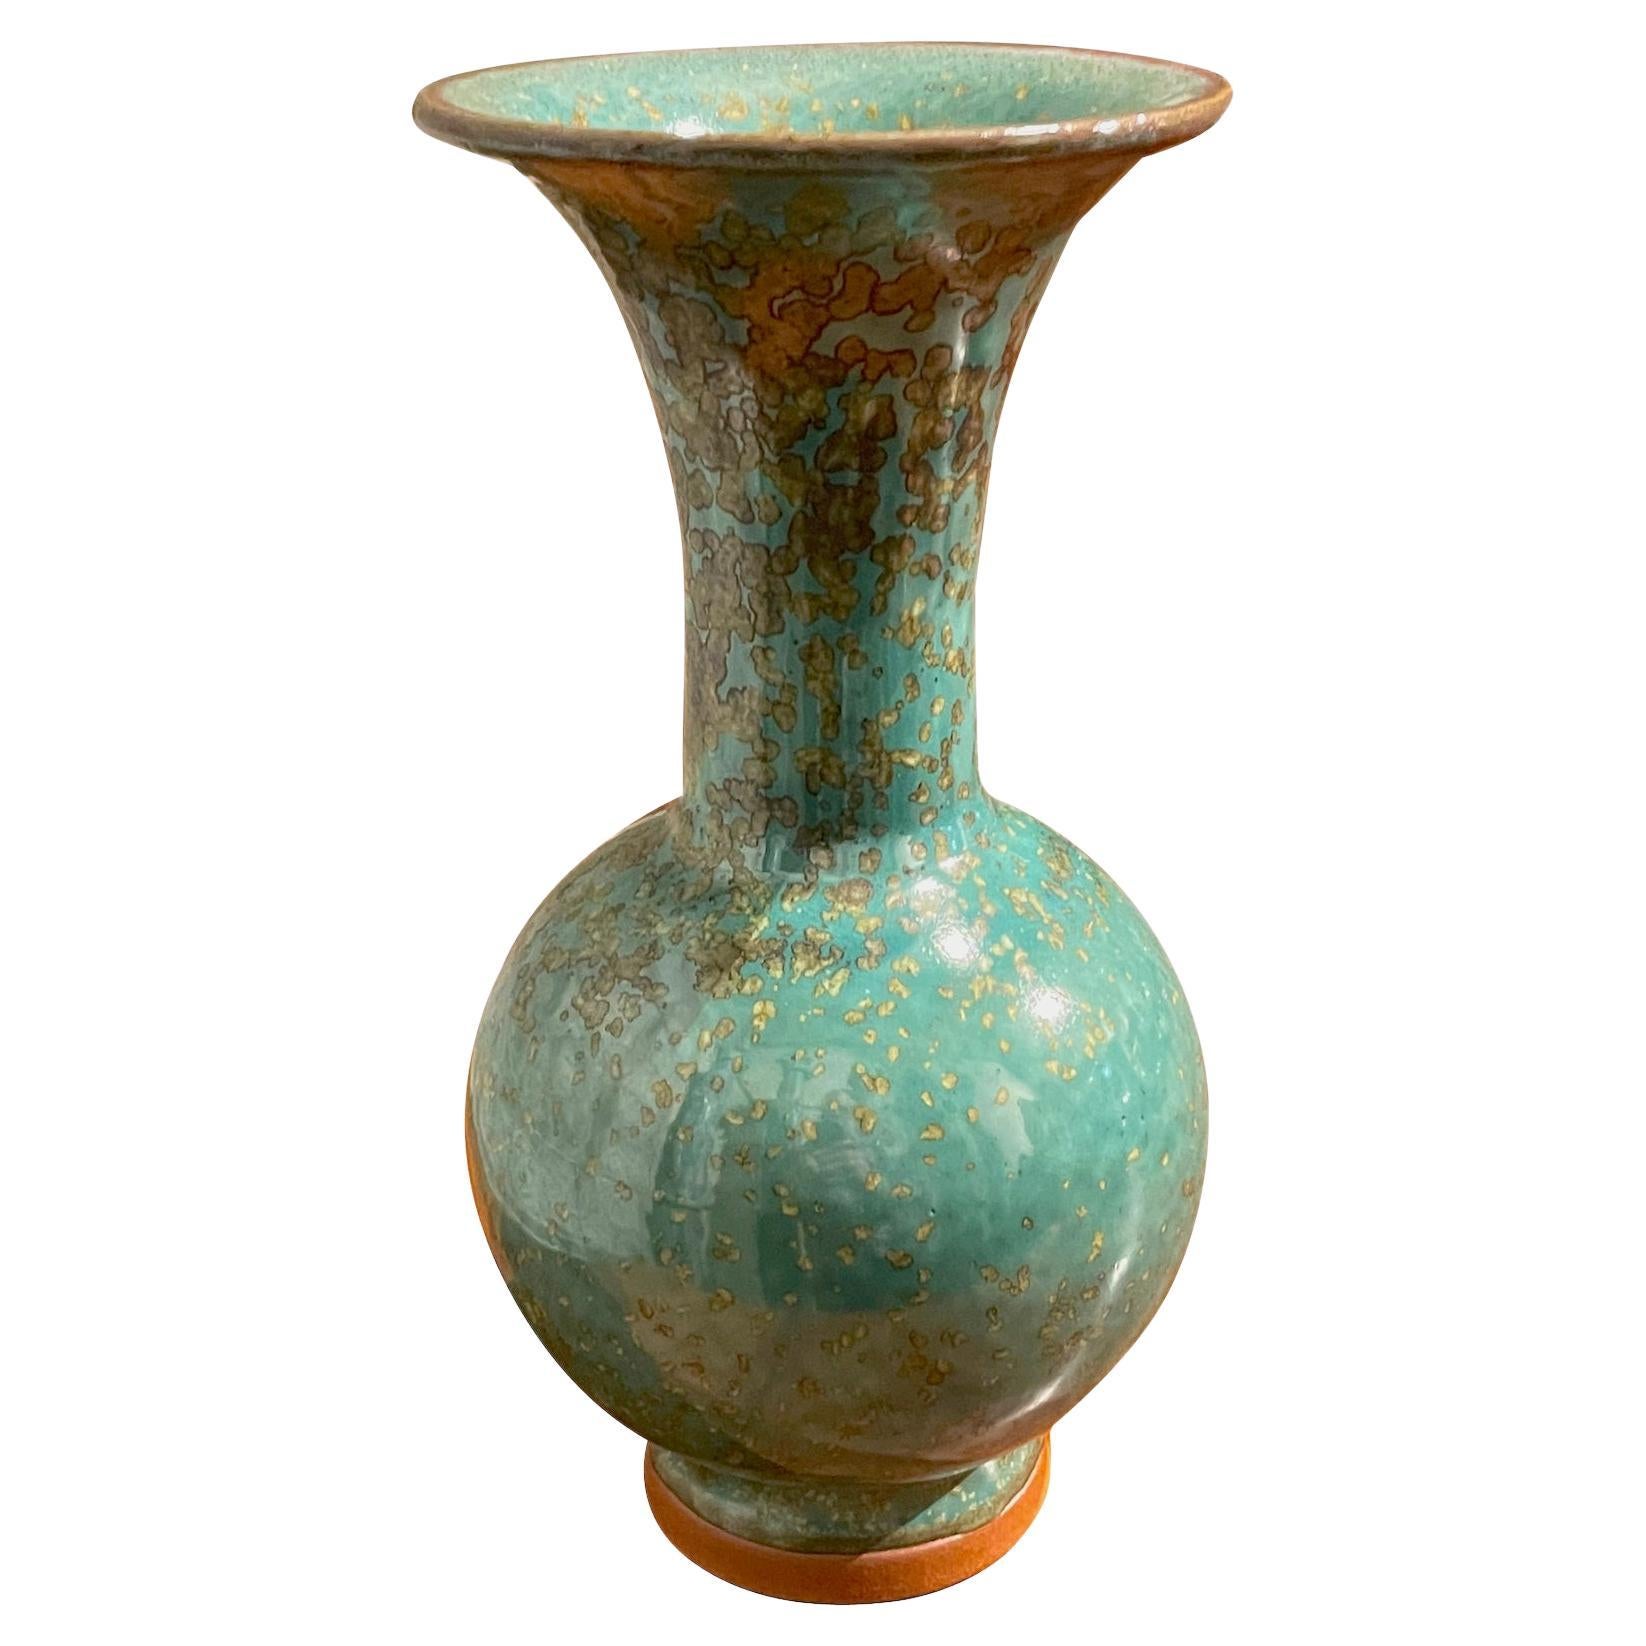 Turquoise with Gold Speckled Glaze Wide Mouth Opening Vase, China, Contemporary